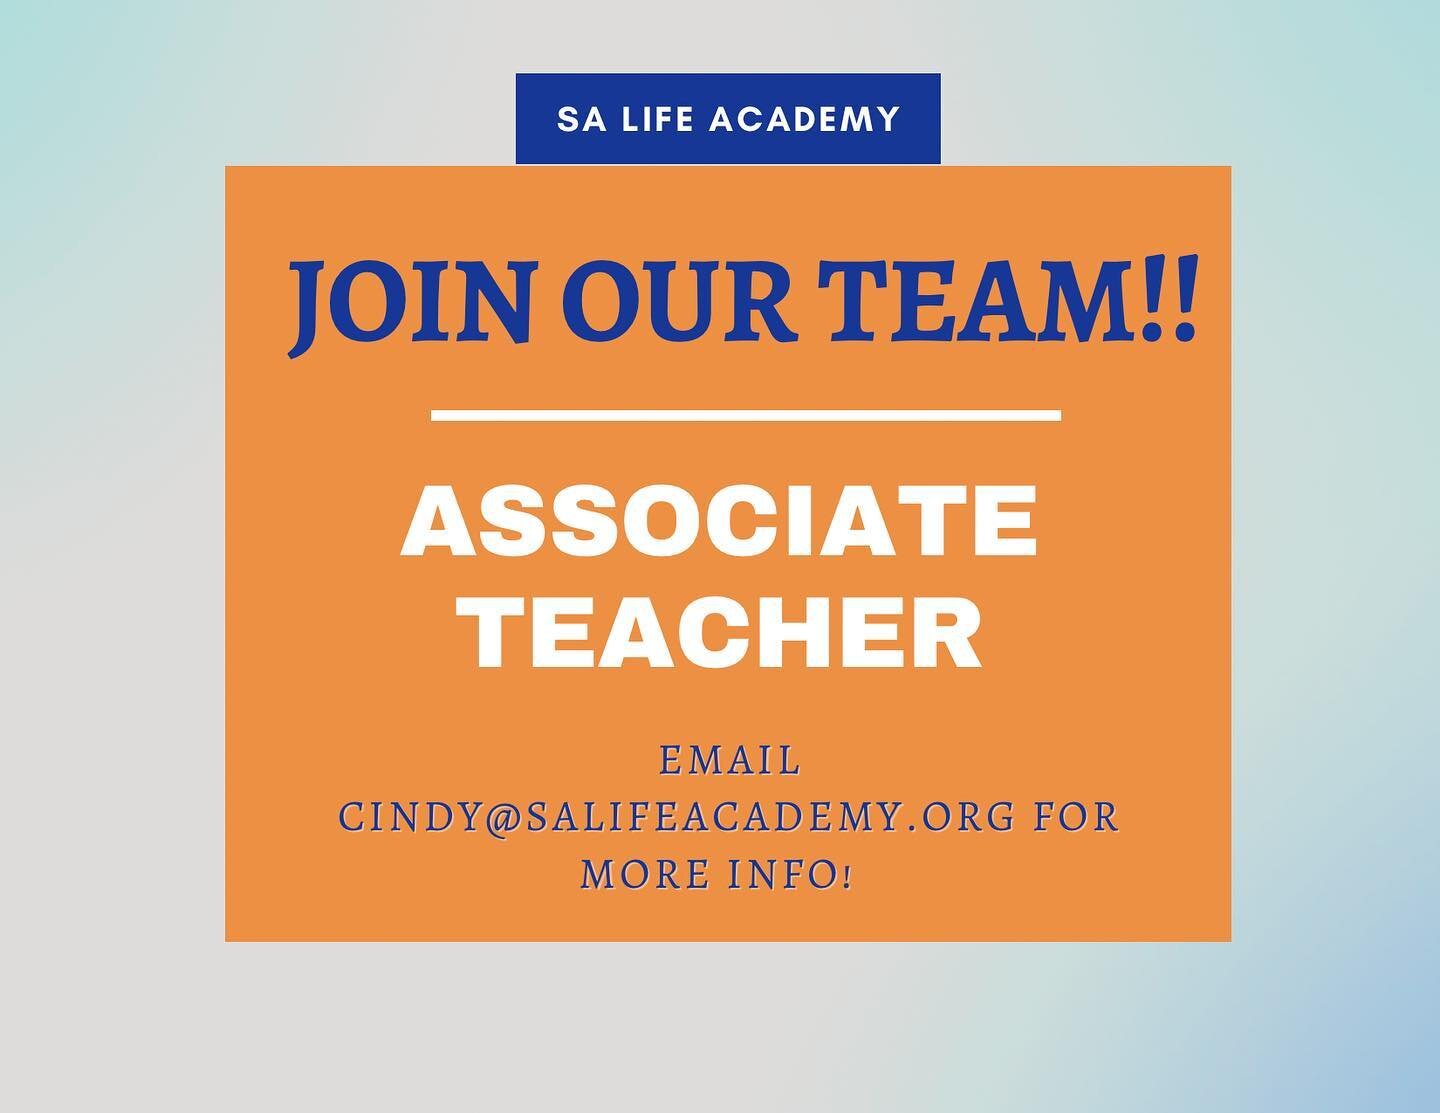 ‼️We are hiring! Come join the fun at SA Life‼️

Share with anyone who might be interested in joining our wonderful team! 

#salifeacademy #newopportunities #hiringnow #joinourteam #doinglifetogether